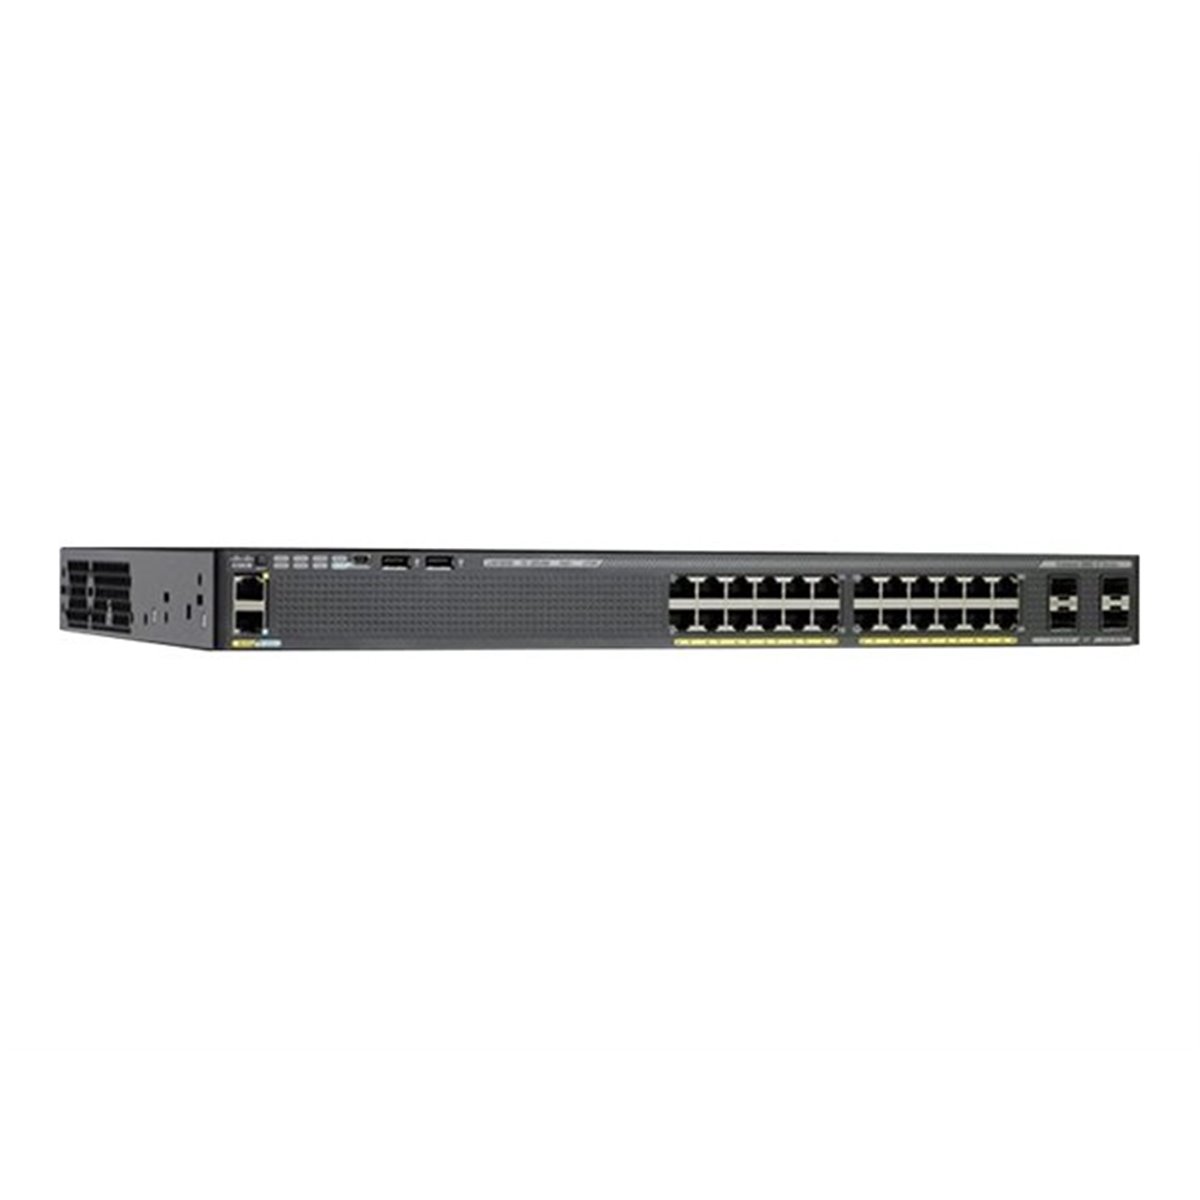 Cisco Catalyst 2960X-24PS-L 24 Ports Manageable Ethernet Switch - 2 Layer Supported - PoE Ports - 1U High - Rack-mountable, Desk